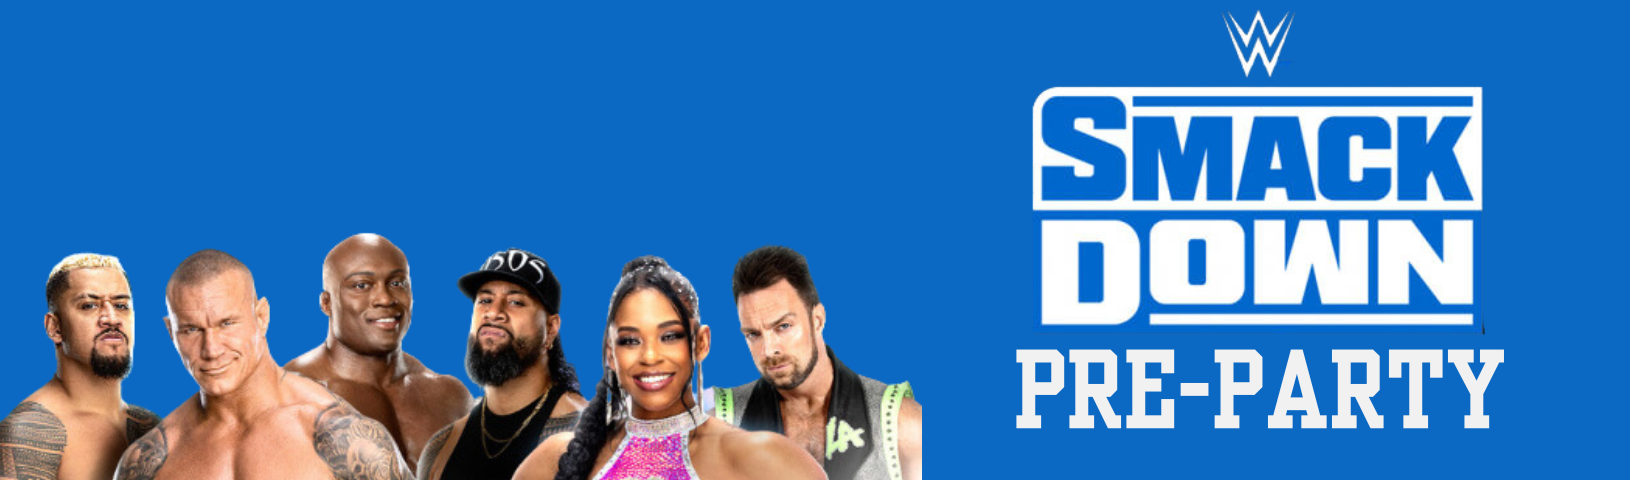 WWE SMACKDOWN PRE-PARTY Background Image